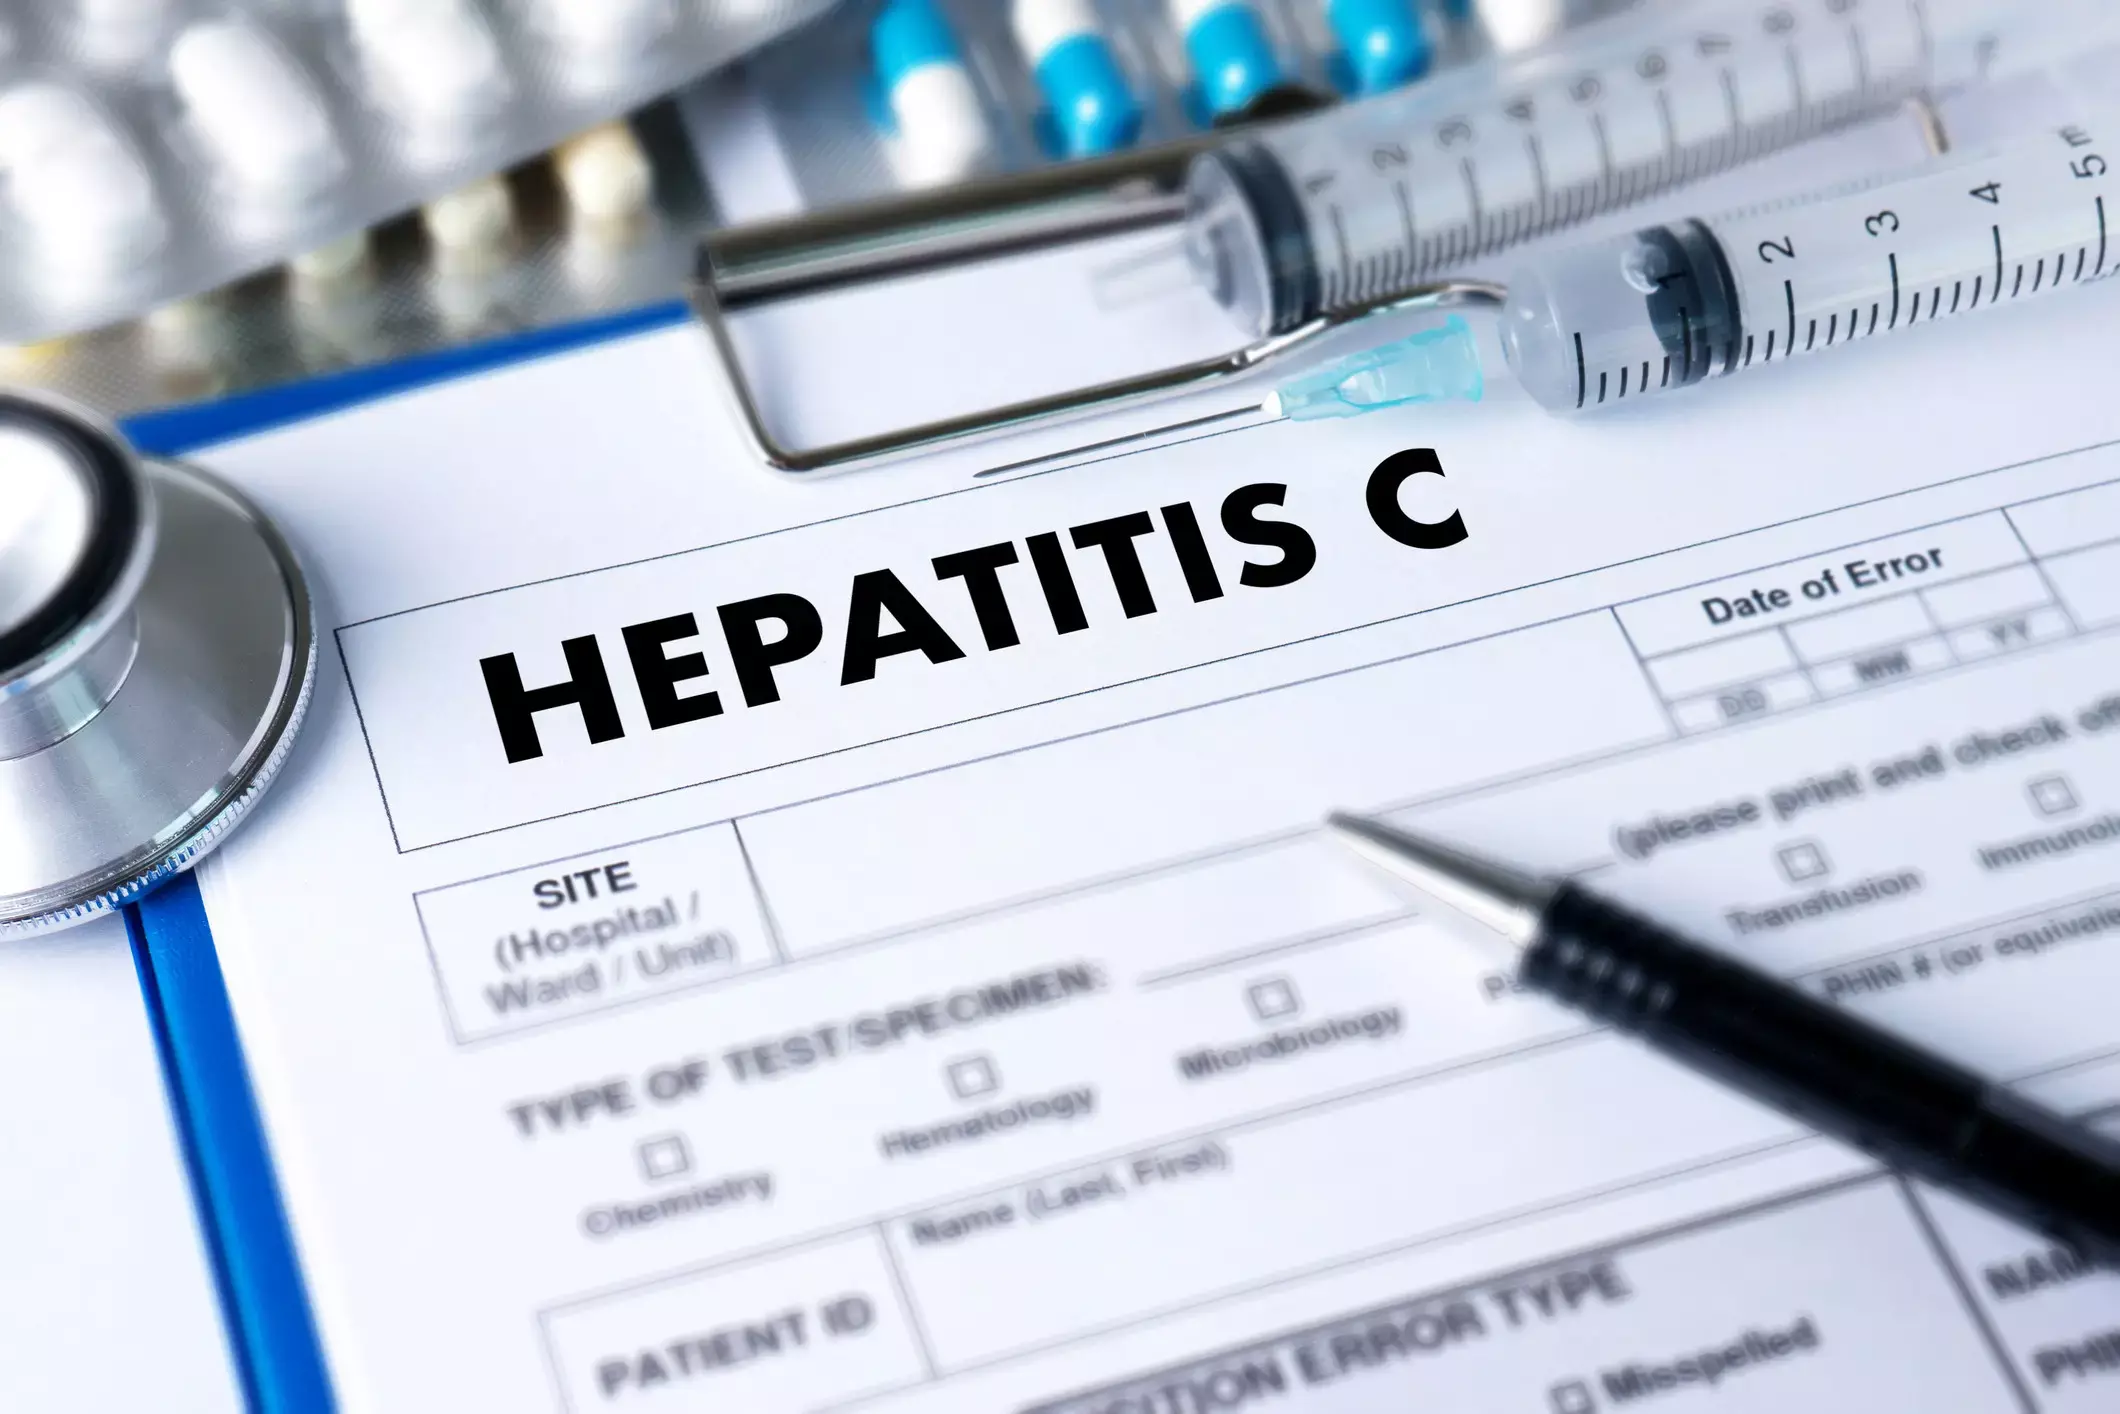 High viral load and bleeding before delivery may increase risk of perinatal transmission of hepatitis C